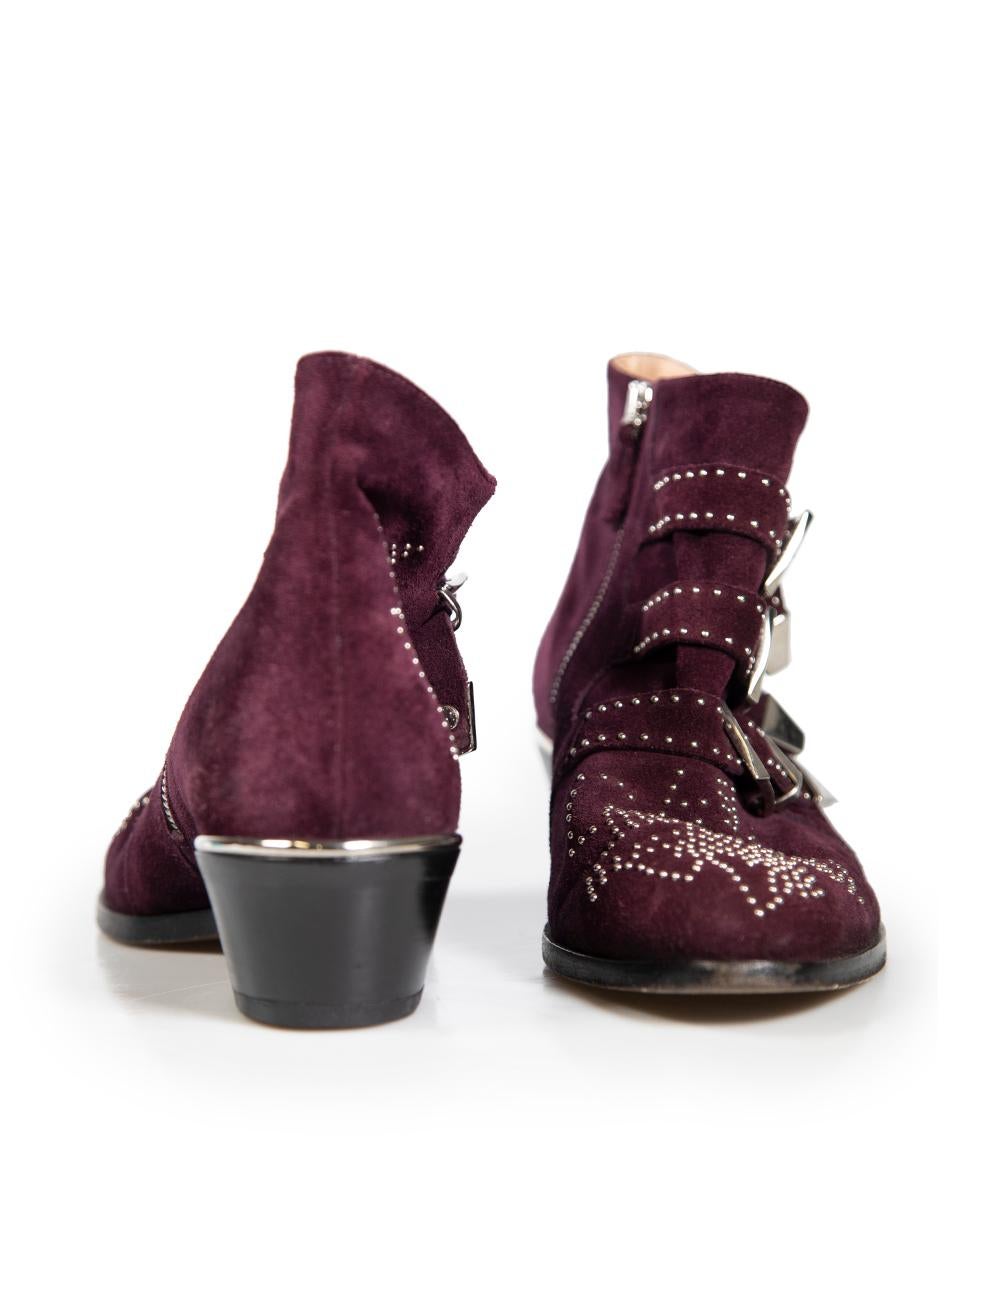 Chloe Purple Suede Susanna Studded Ankle Boots In Excellent Condition In London, GB